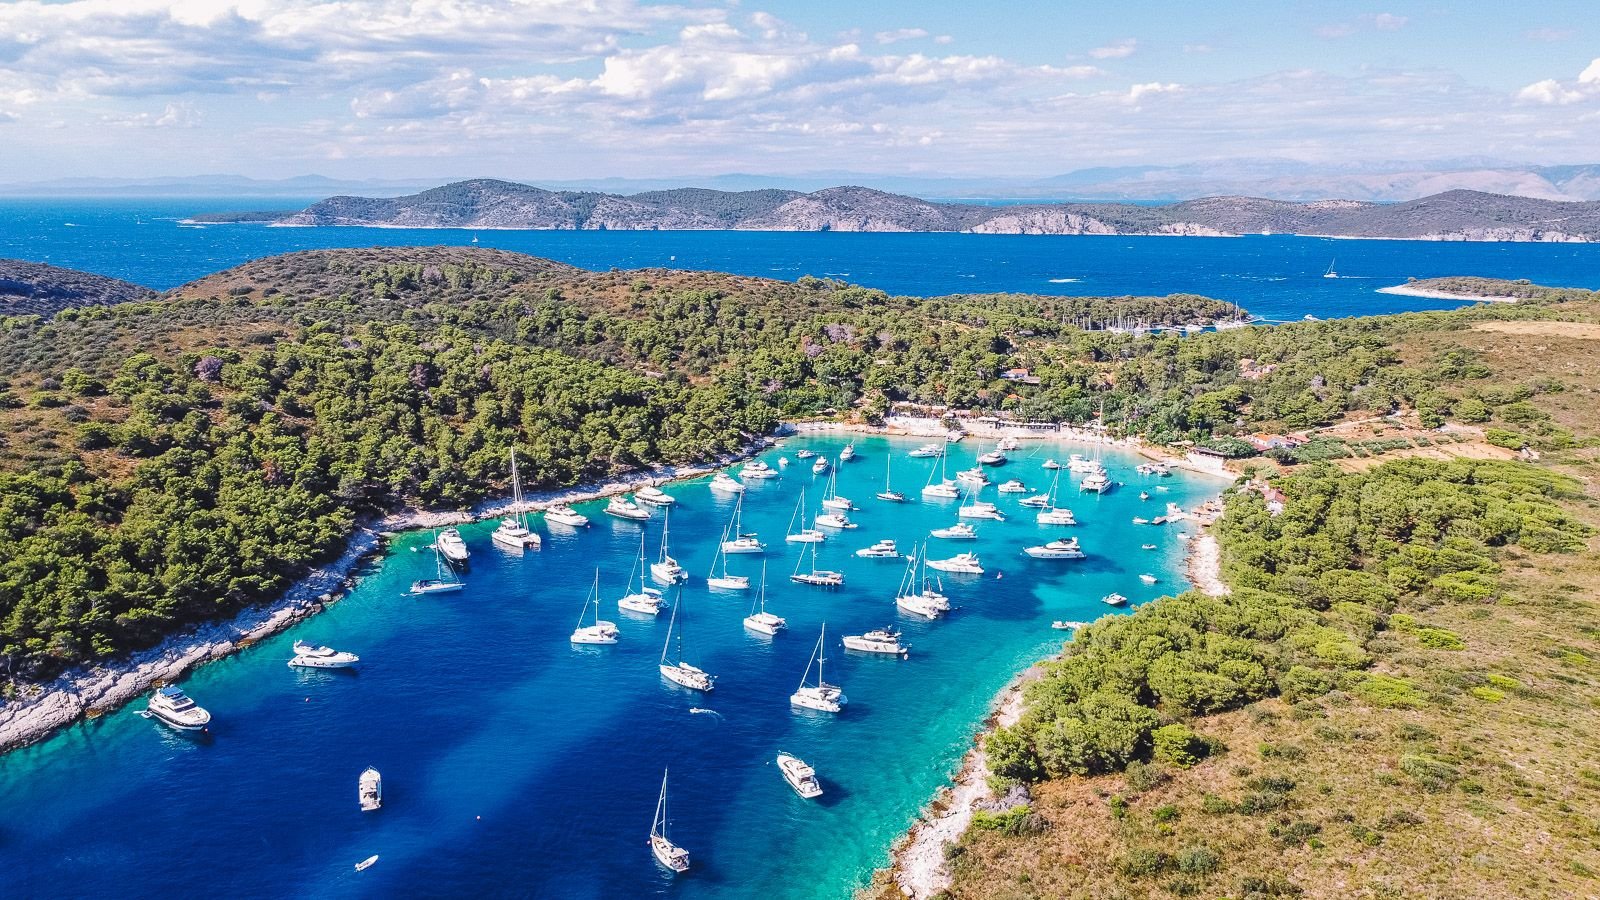 drone shot of a turquoise blue bay with many yachts and sailing boats anchored and the bay surrounded by green pine trees. Deep blue sea and islands in the distance